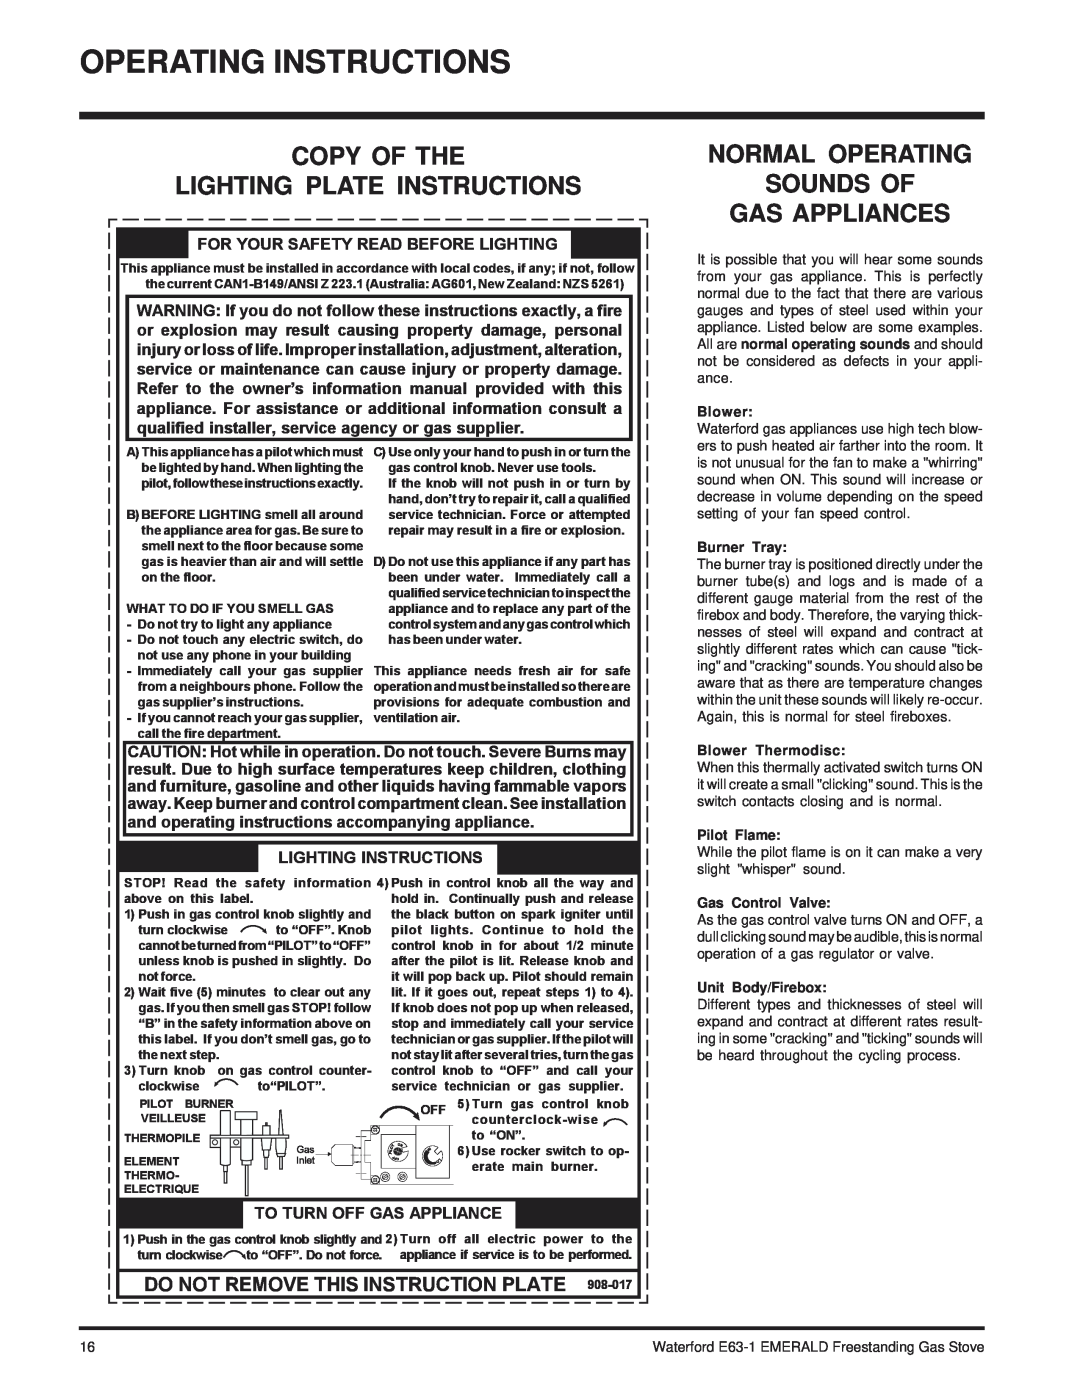 Waterford Appliances E63-NG1 Copy Of The Lighting Plate Instructions, Normal Operating Sounds Of Gas Appliances, Blower 